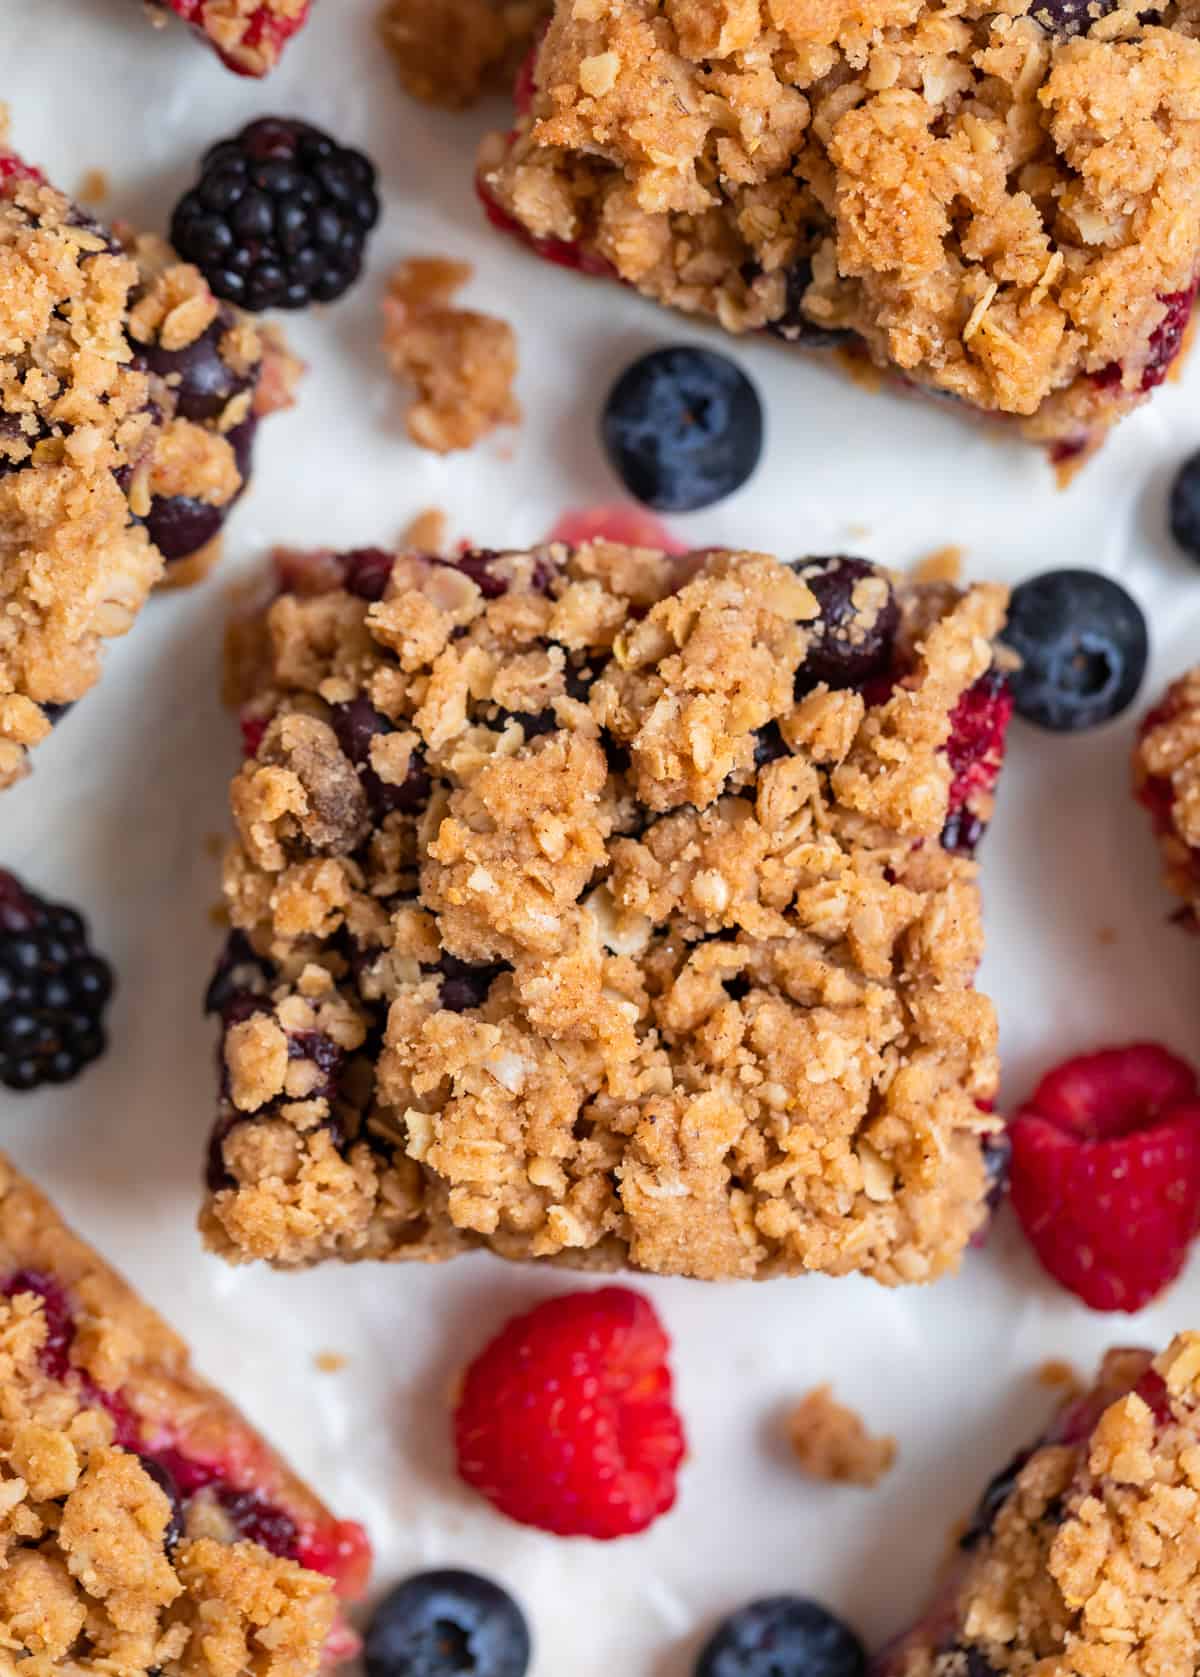 Mixed berry oat bars with crumble topping on white background with fresh berries and crumbles surrounding.